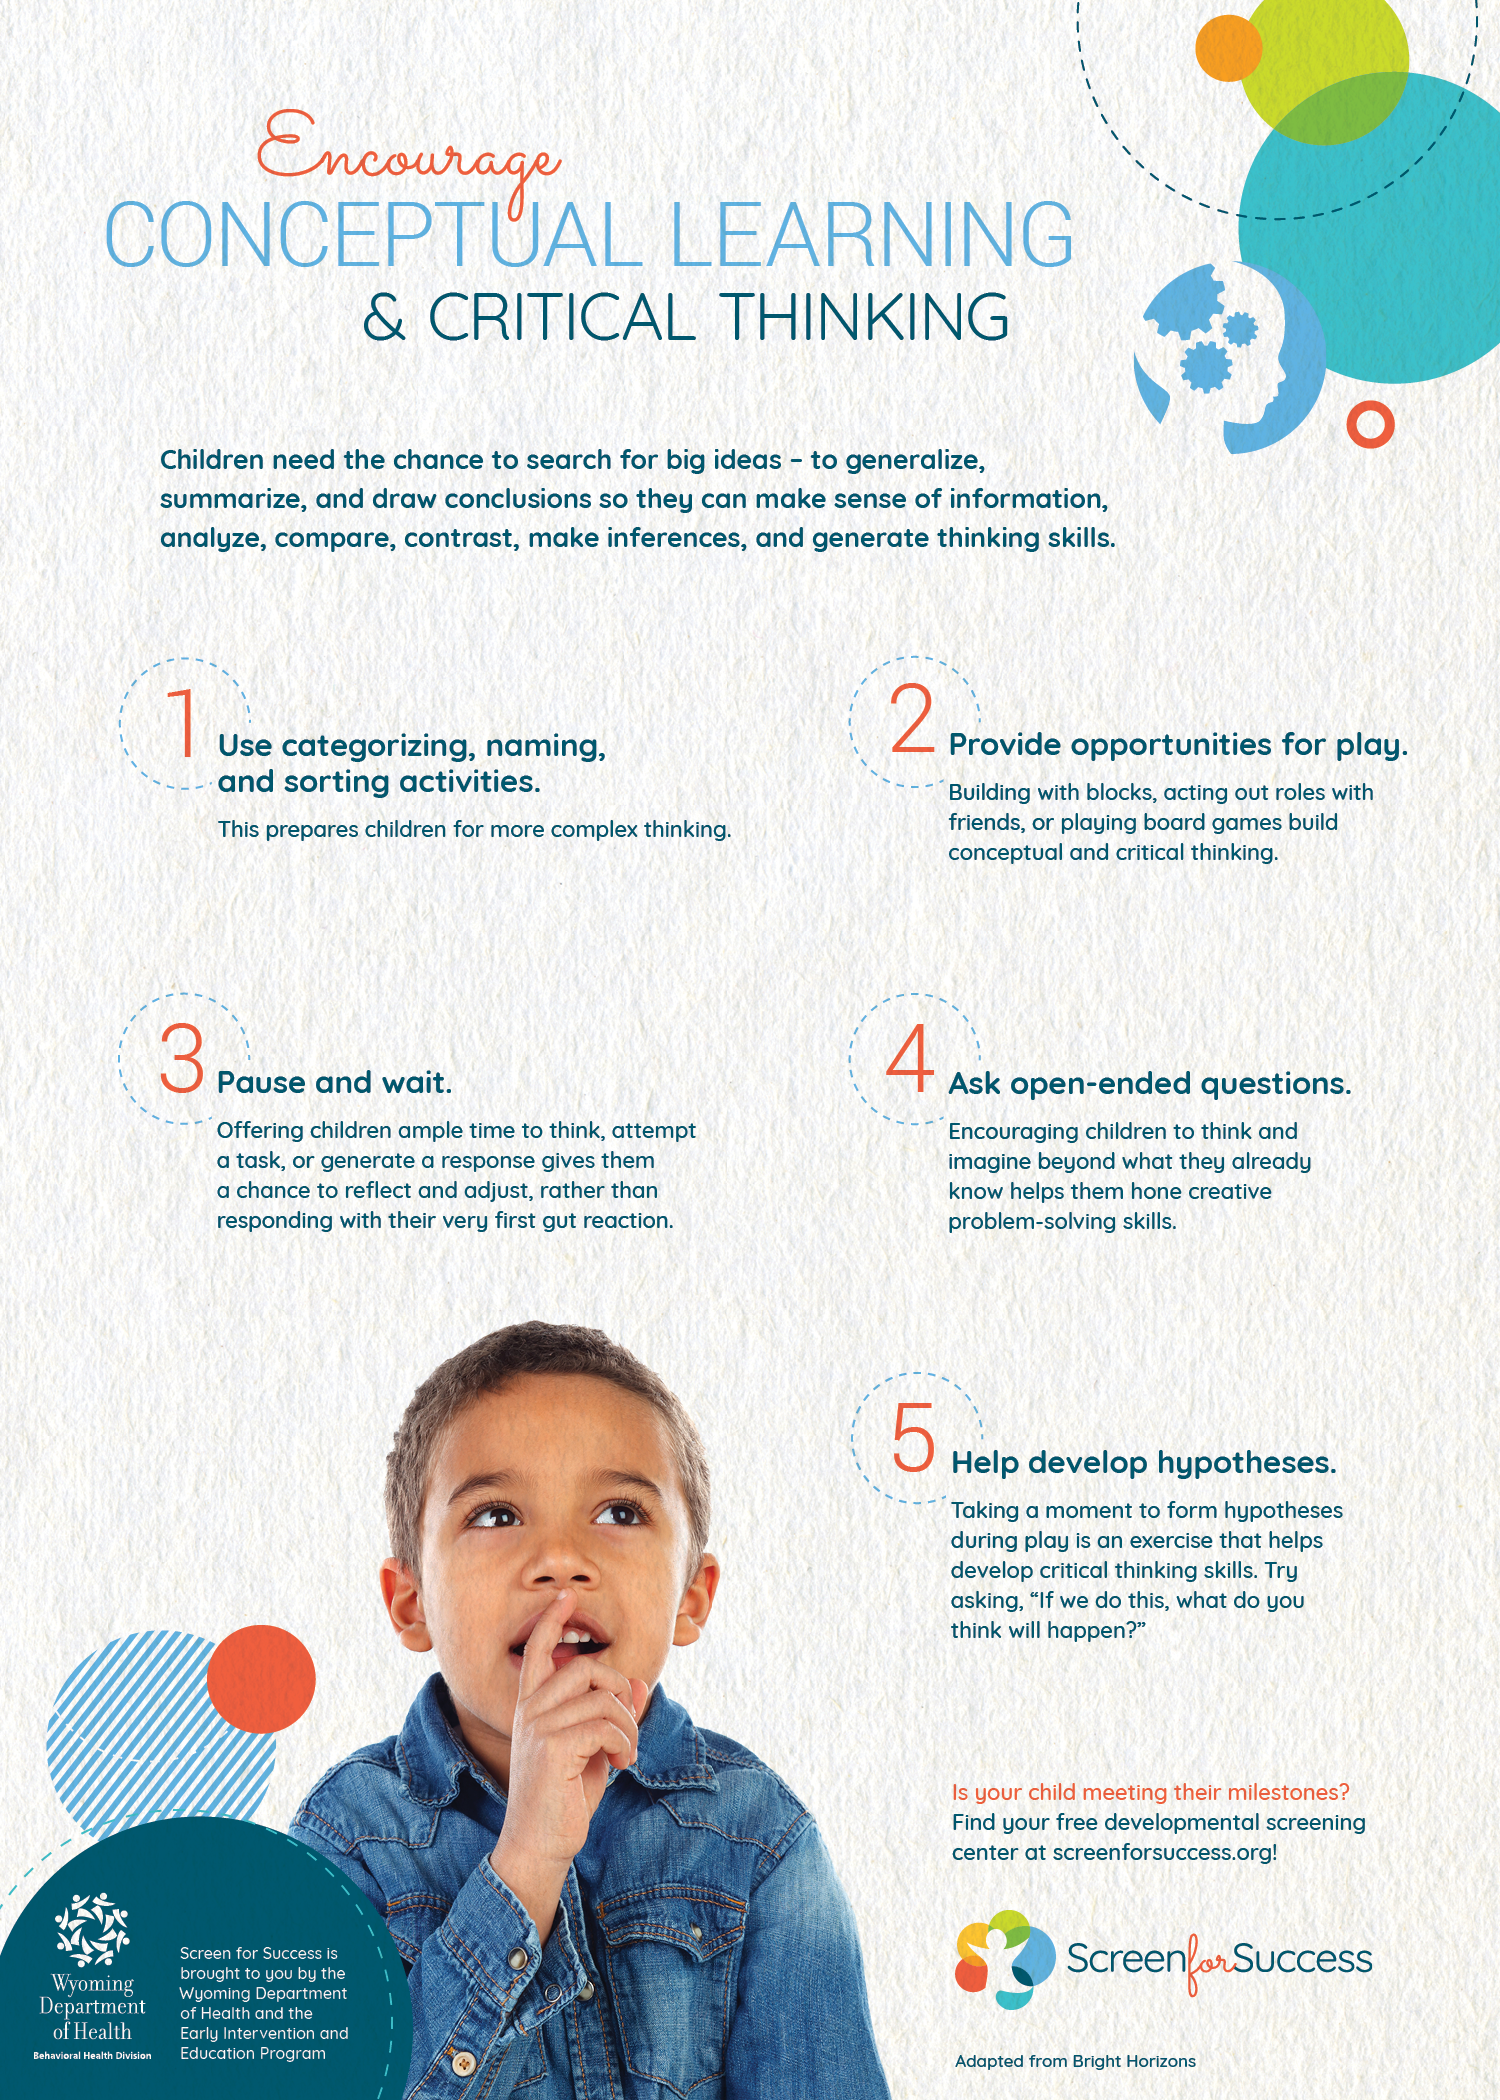 Encourage Conceptual Learning & Critical Thinking